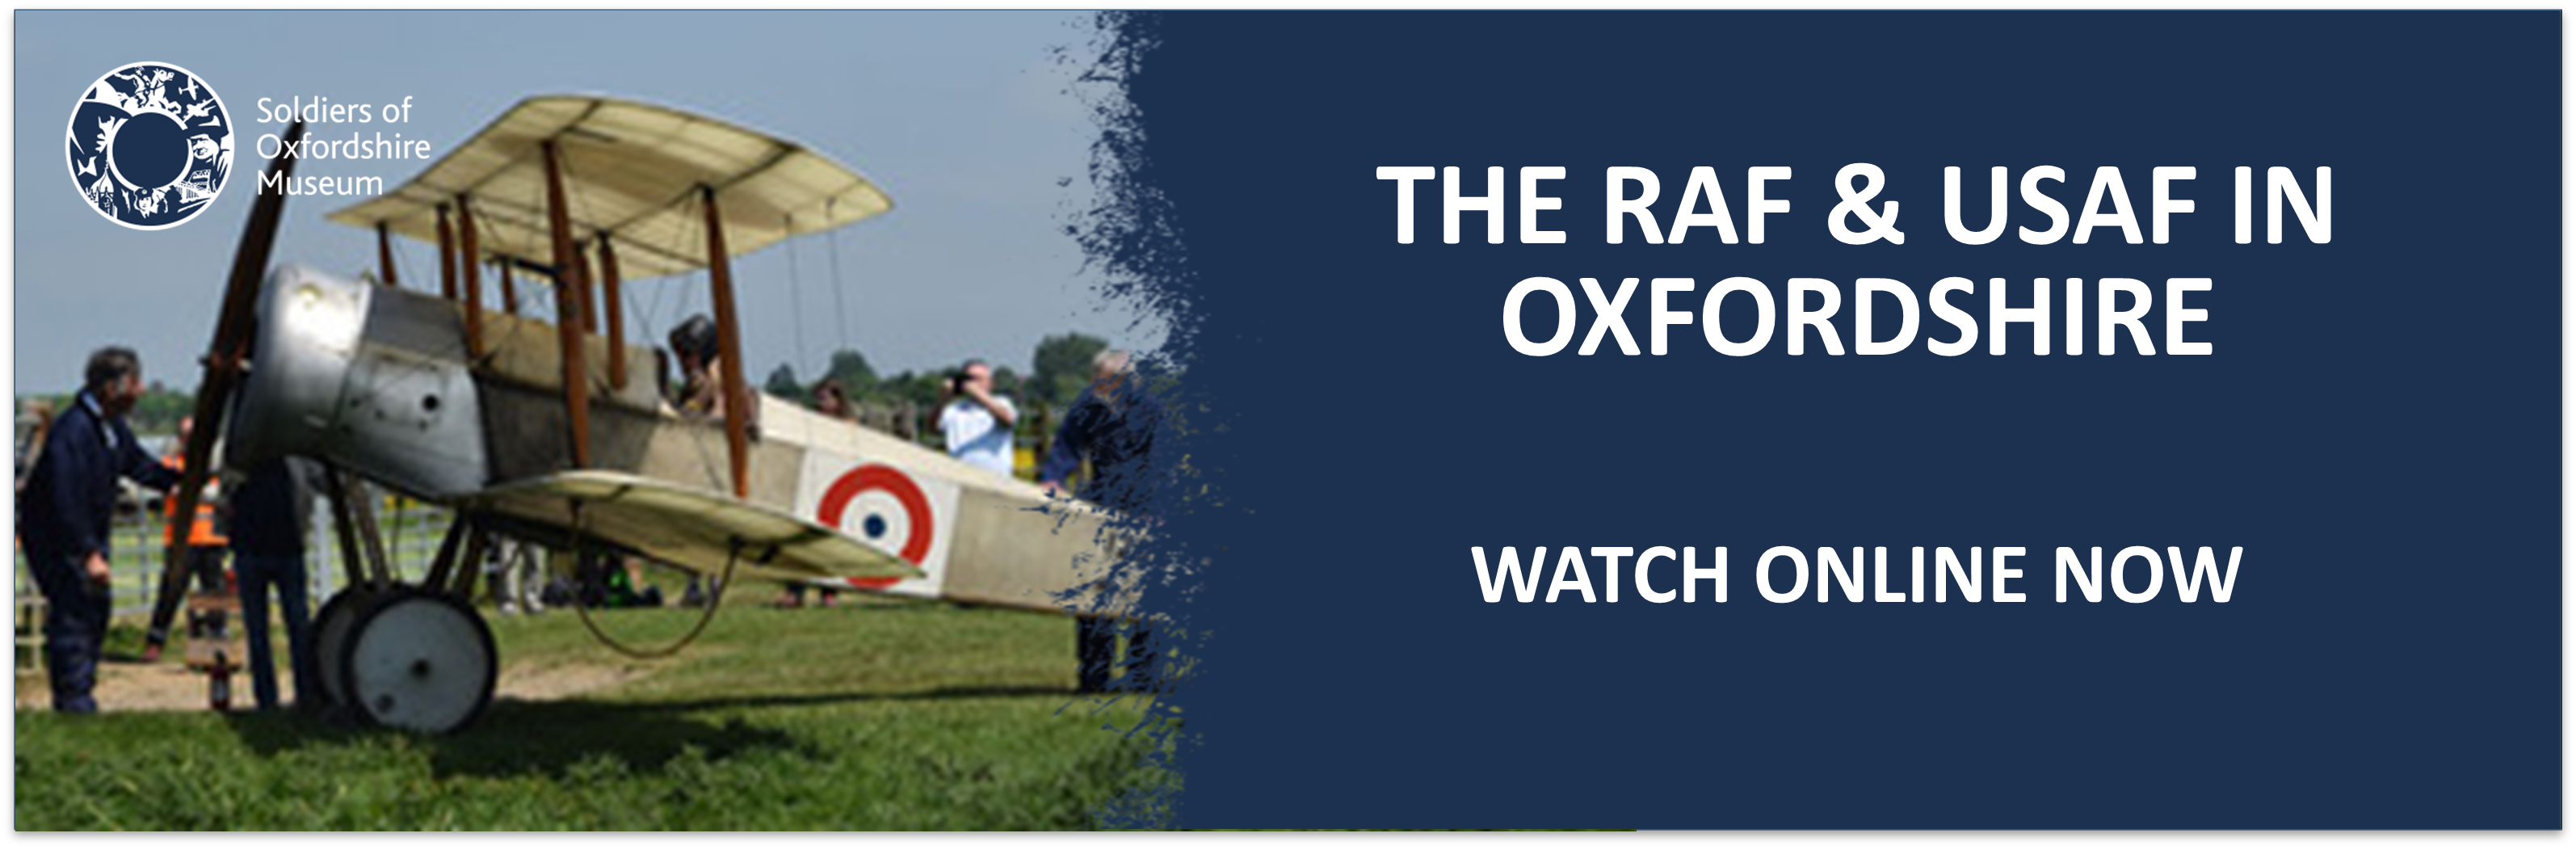 Click here to watch the recorded online talk, The RAF & USAF in Oxfordshire